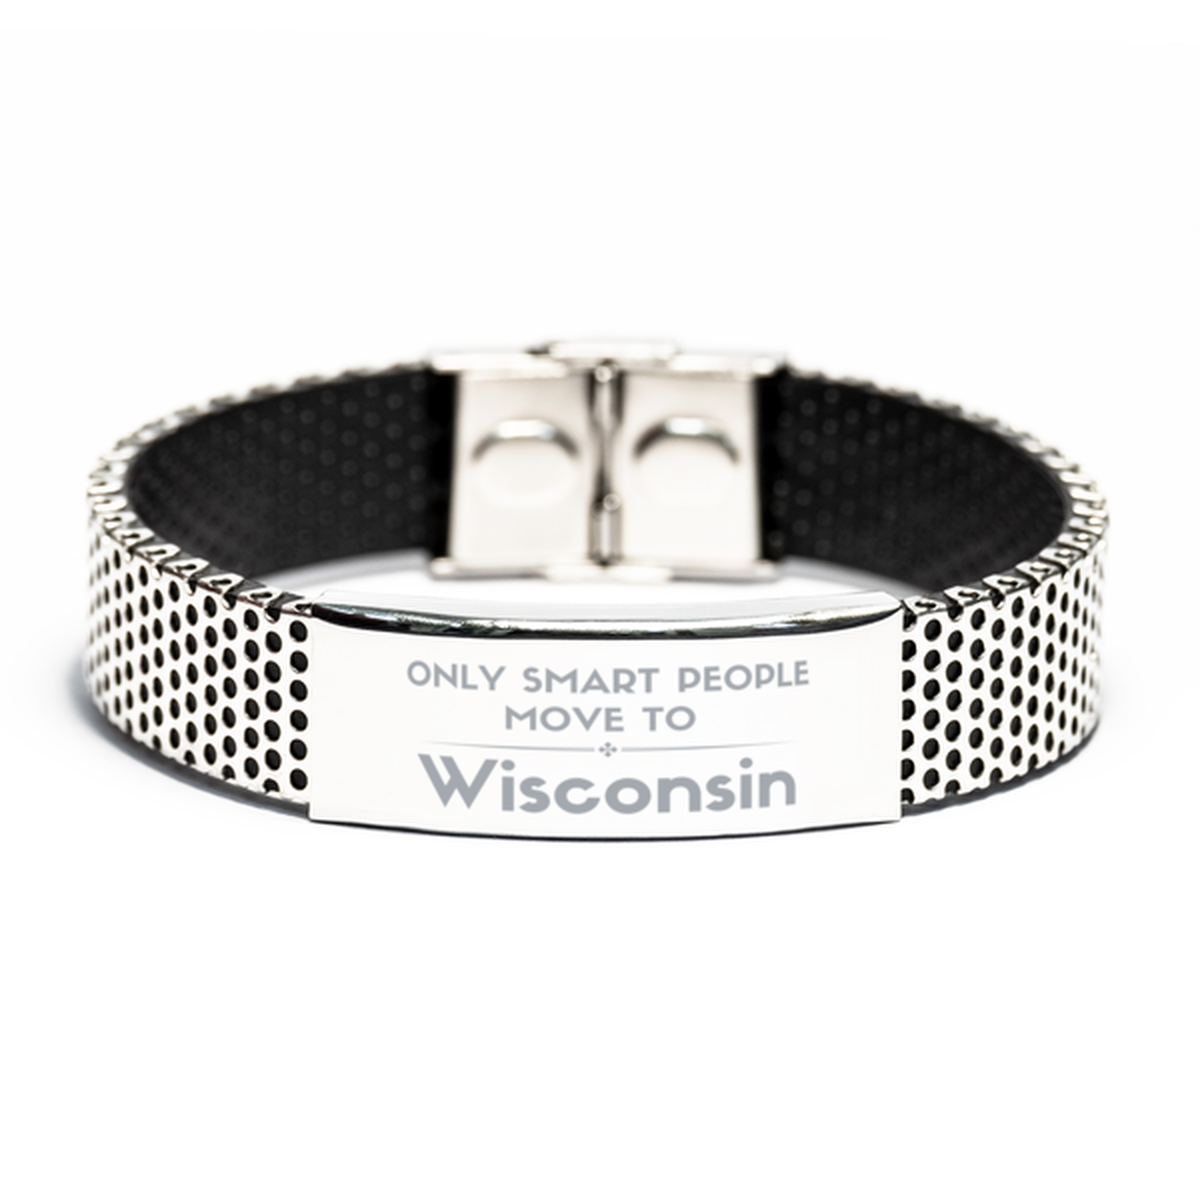 Only smart people move to Wisconsin Stainless Steel Bracelet, Gag Gifts For Wisconsin, Move to Wisconsin Gifts for Friends Coworker Funny Saying Quote